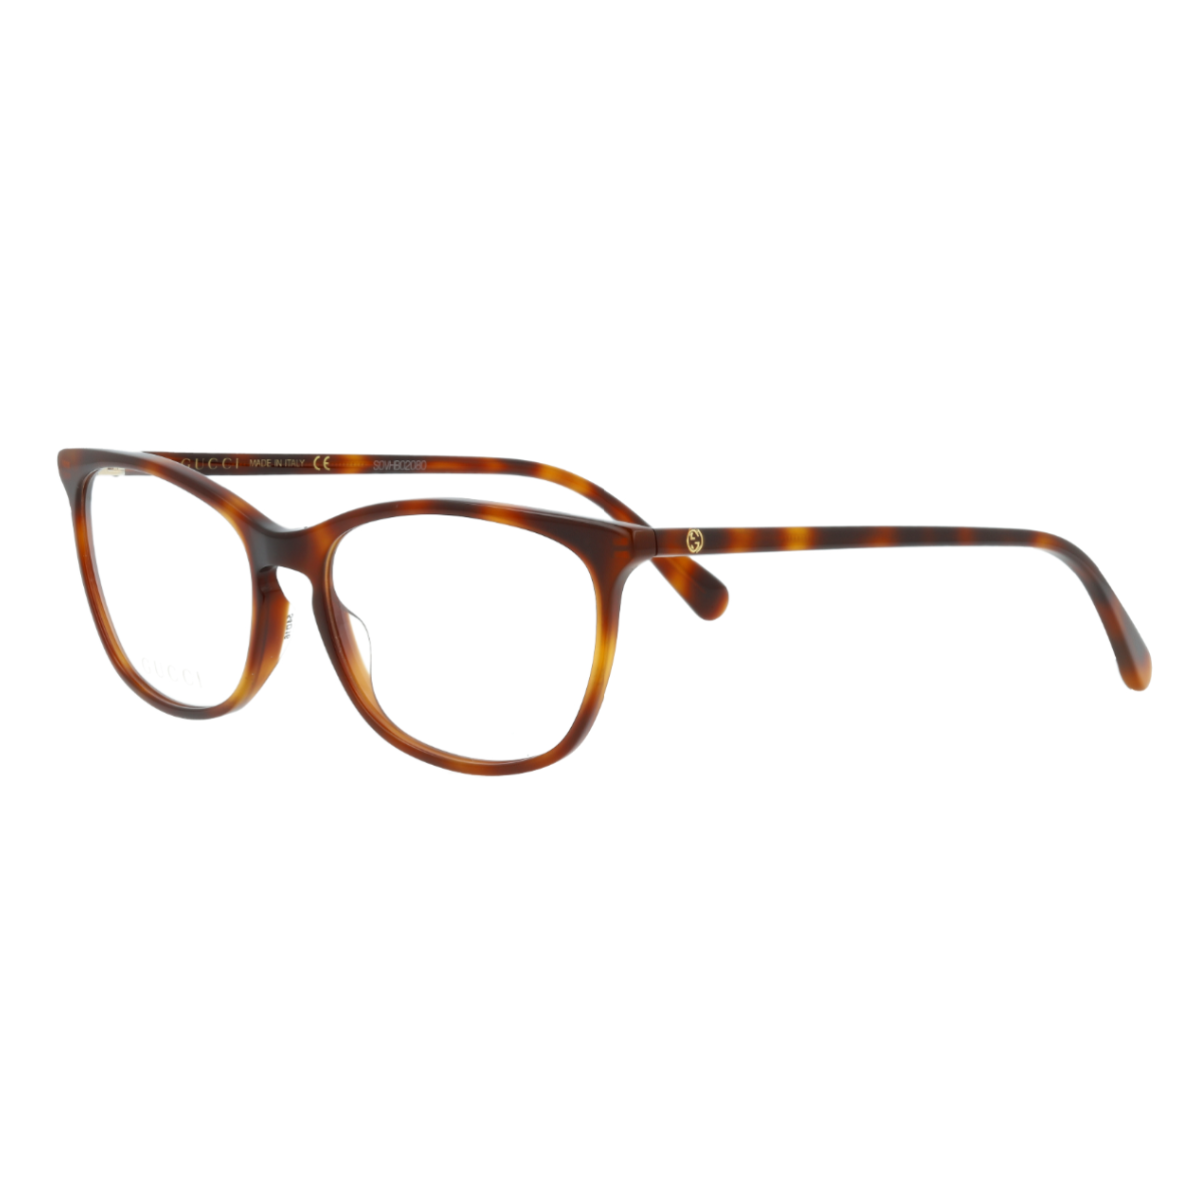  "Gucci 0549O Frames for Women - Fashionable eyewear crafted with style and precision, available at Optorium."